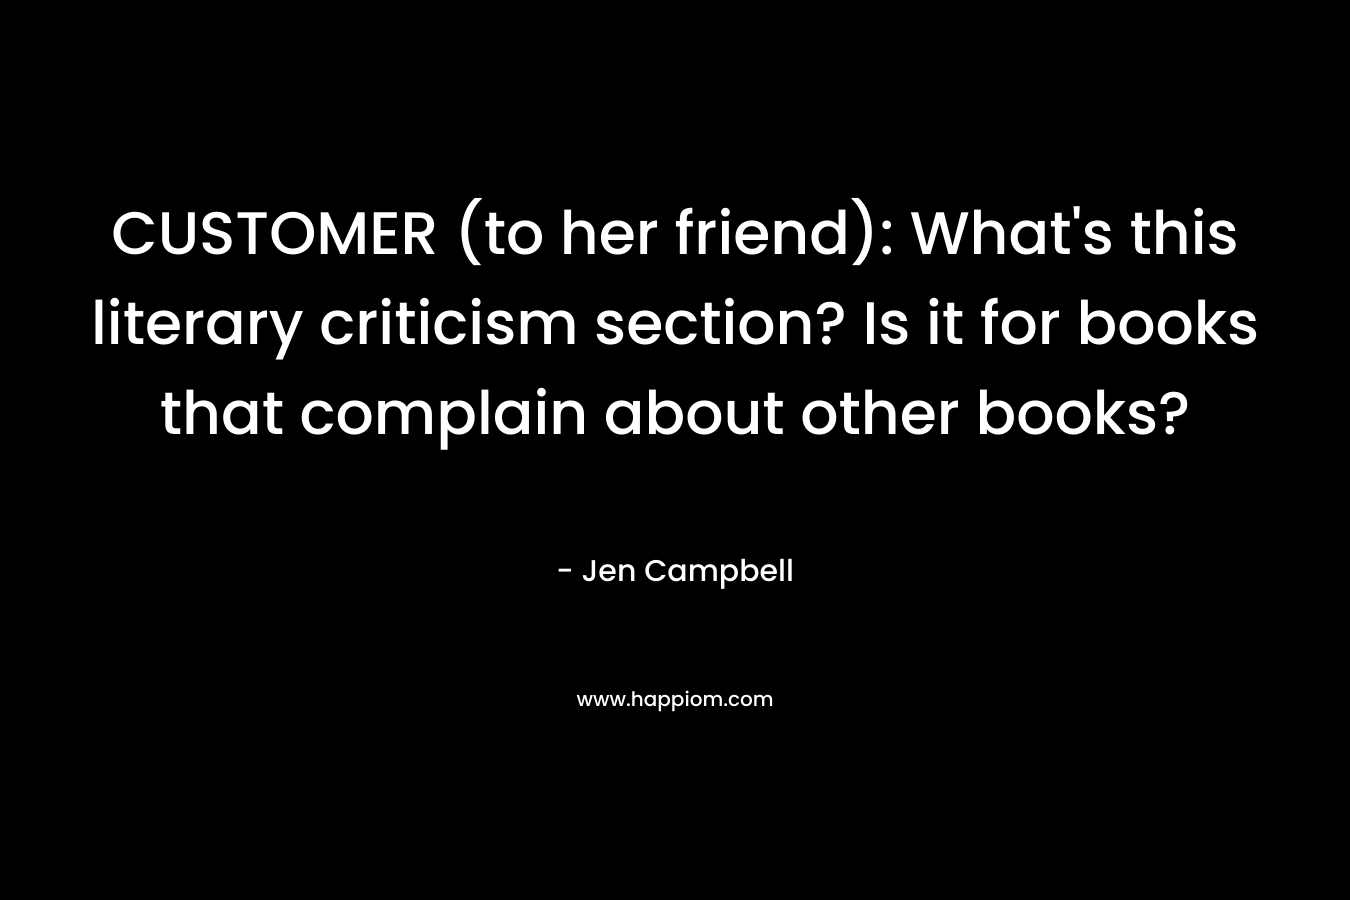 CUSTOMER (to her friend): What’s this literary criticism section? Is it for books that complain about other books? – Jen Campbell